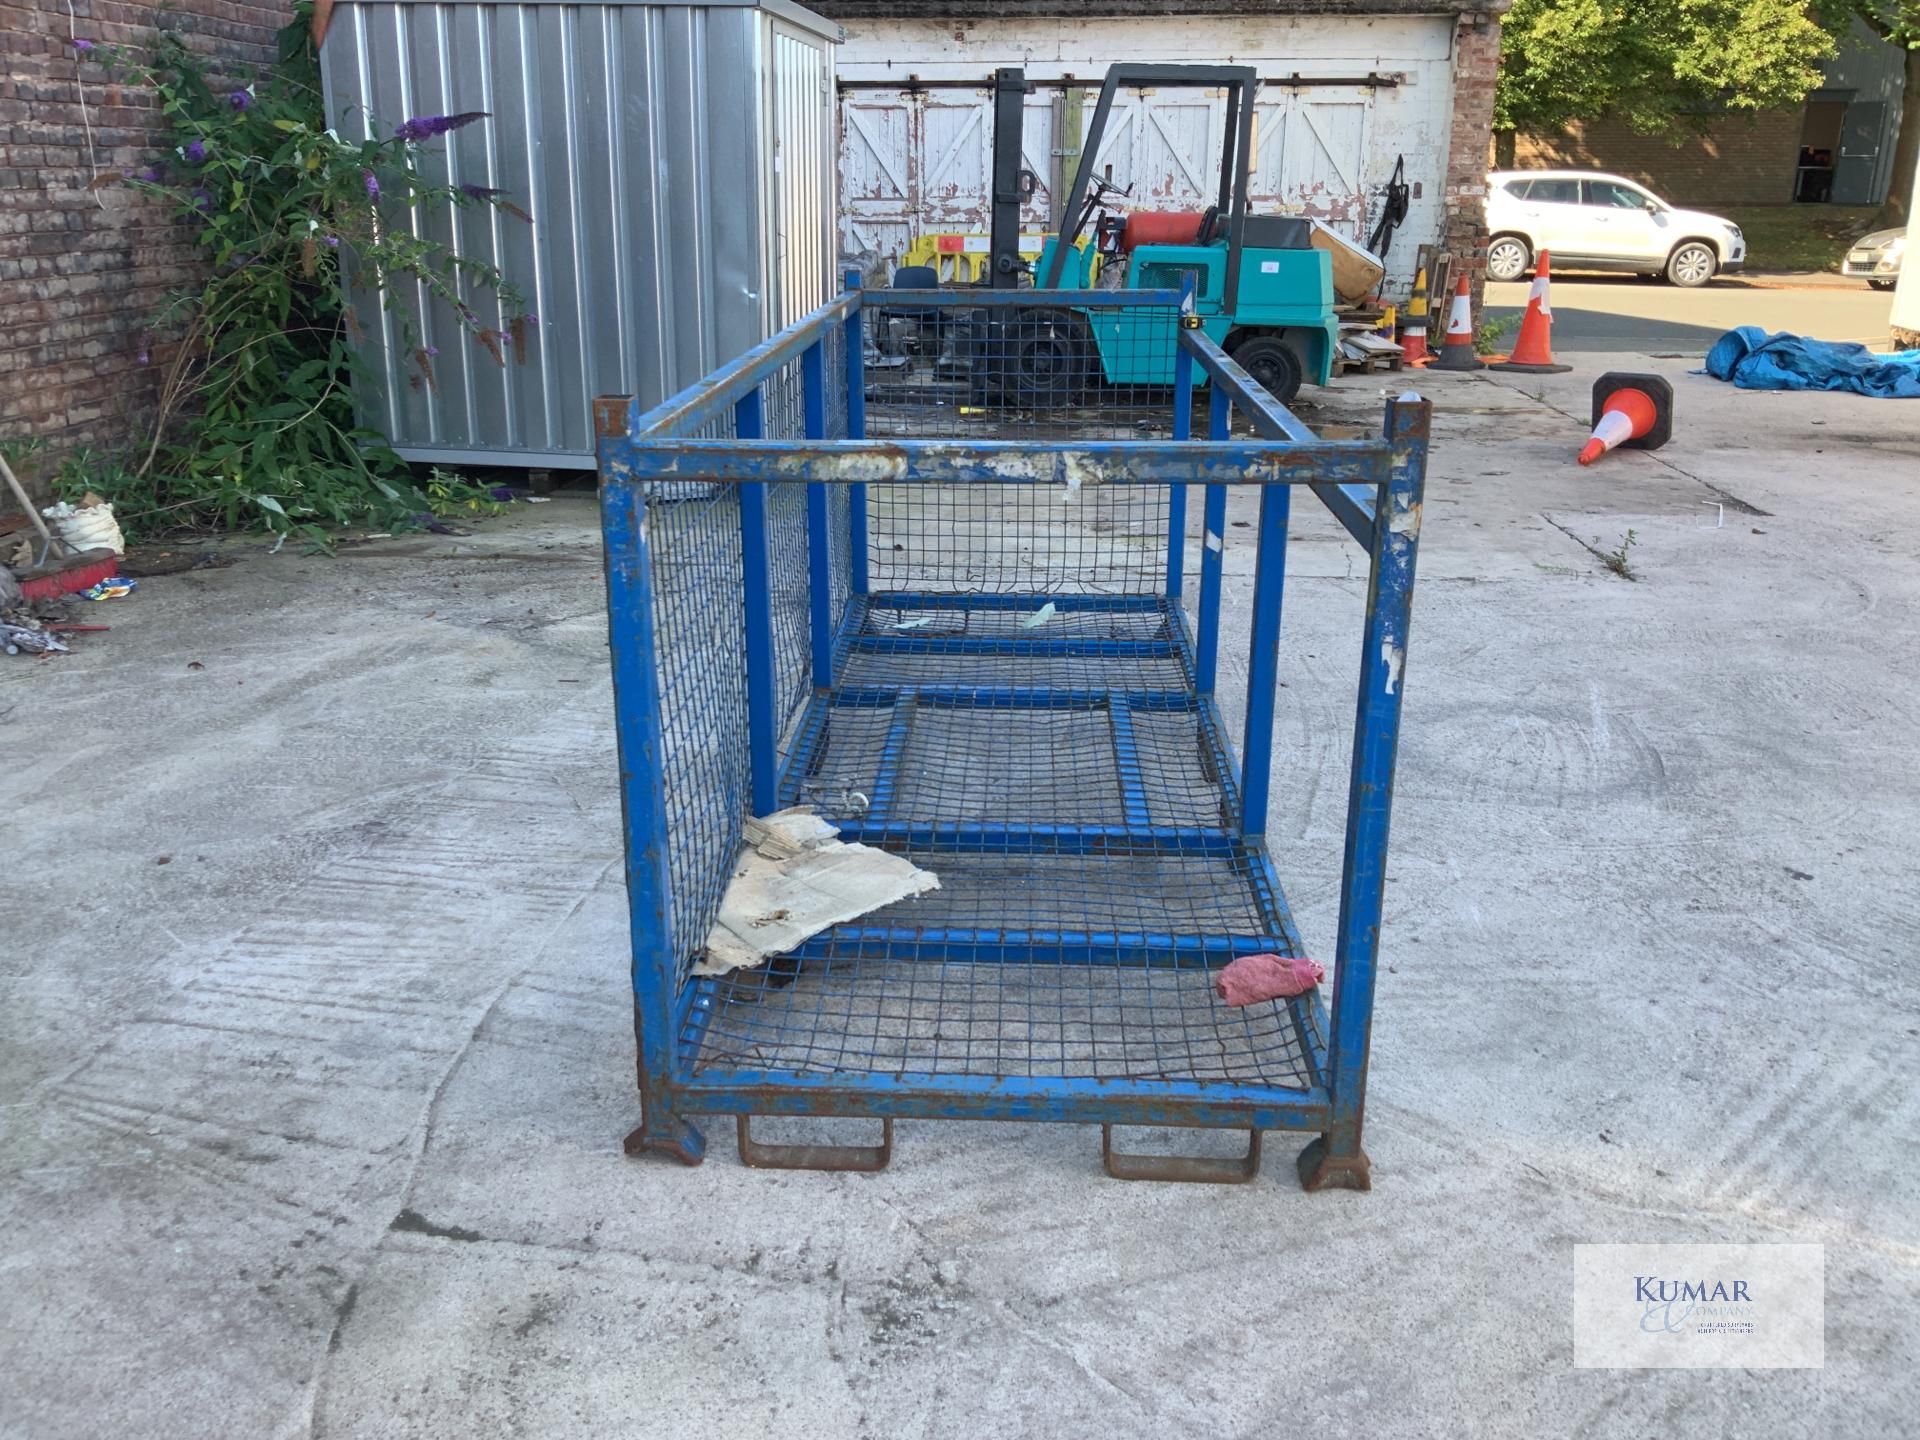 Metal Stillage Suitable for Fork Truck Use - L - 3m x w - 1.1m - Image 4 of 8